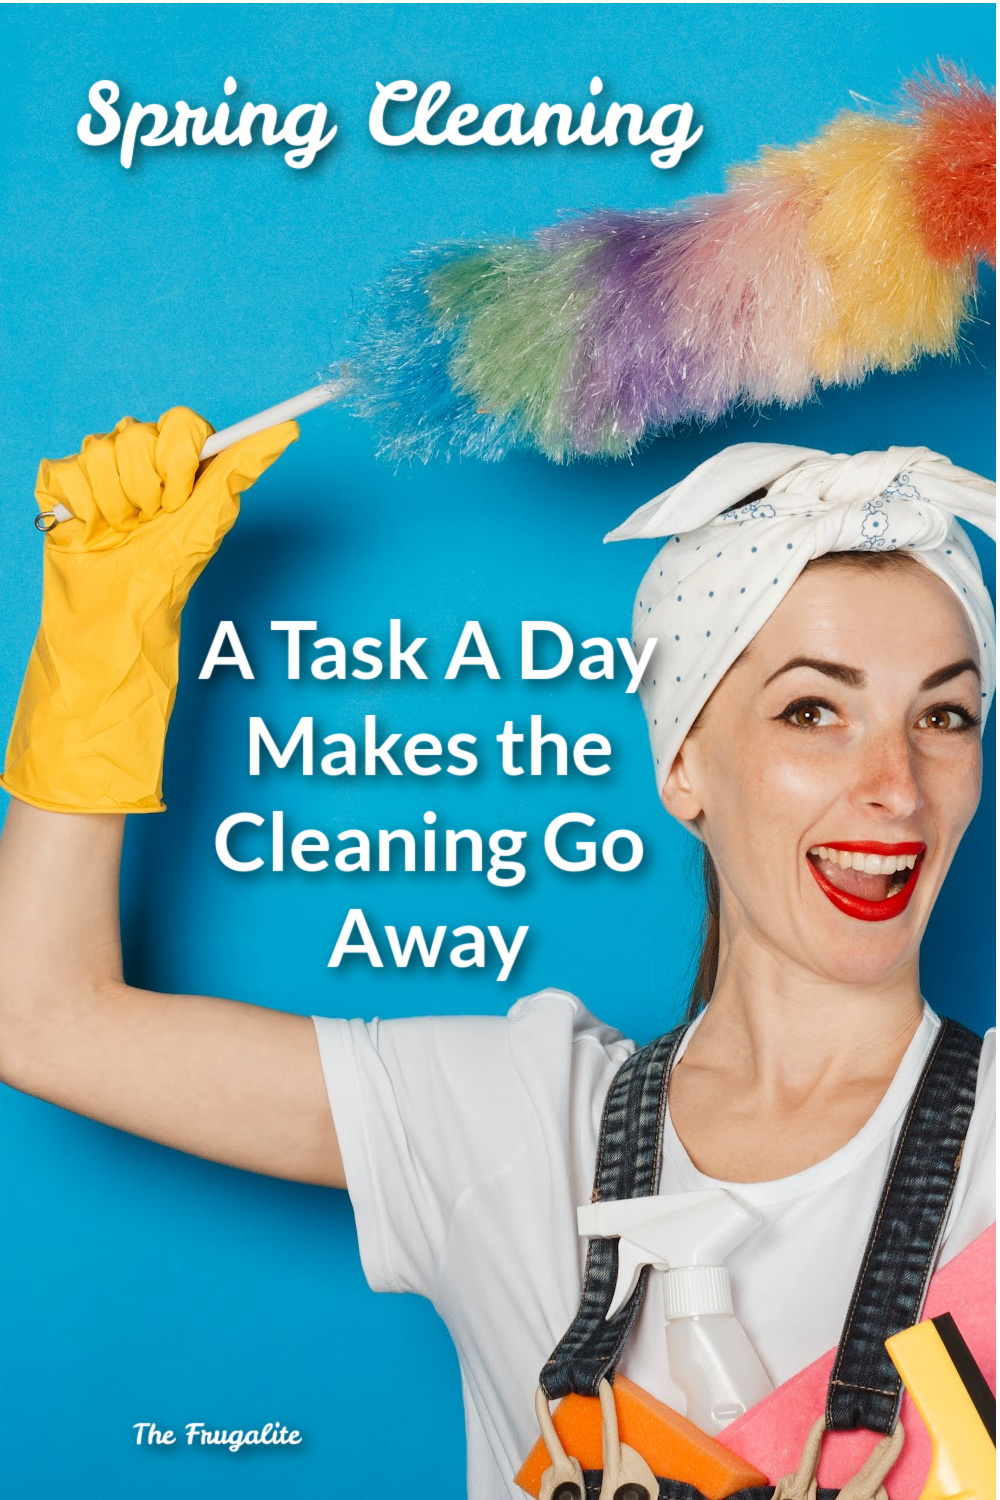 Spring Cleaning Calendar: A Task A Day Makes the Cleaning Go Away